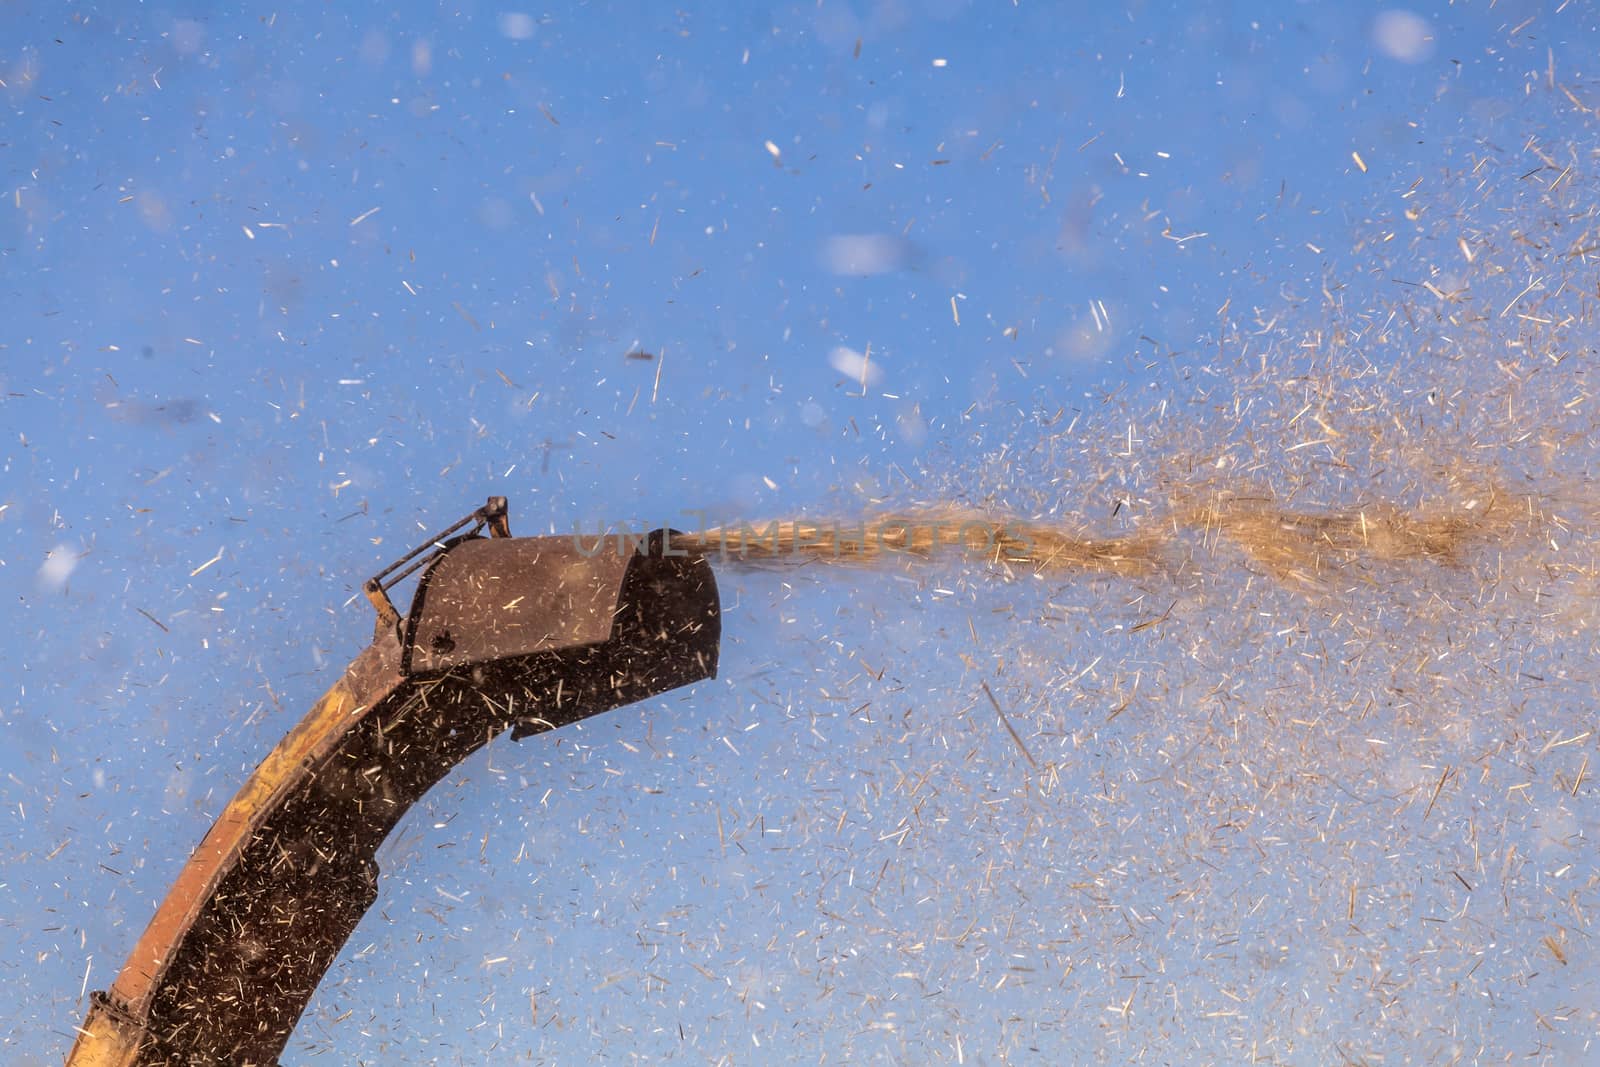 Straw flying from a harvester, Combine removes straw from the field, close-up